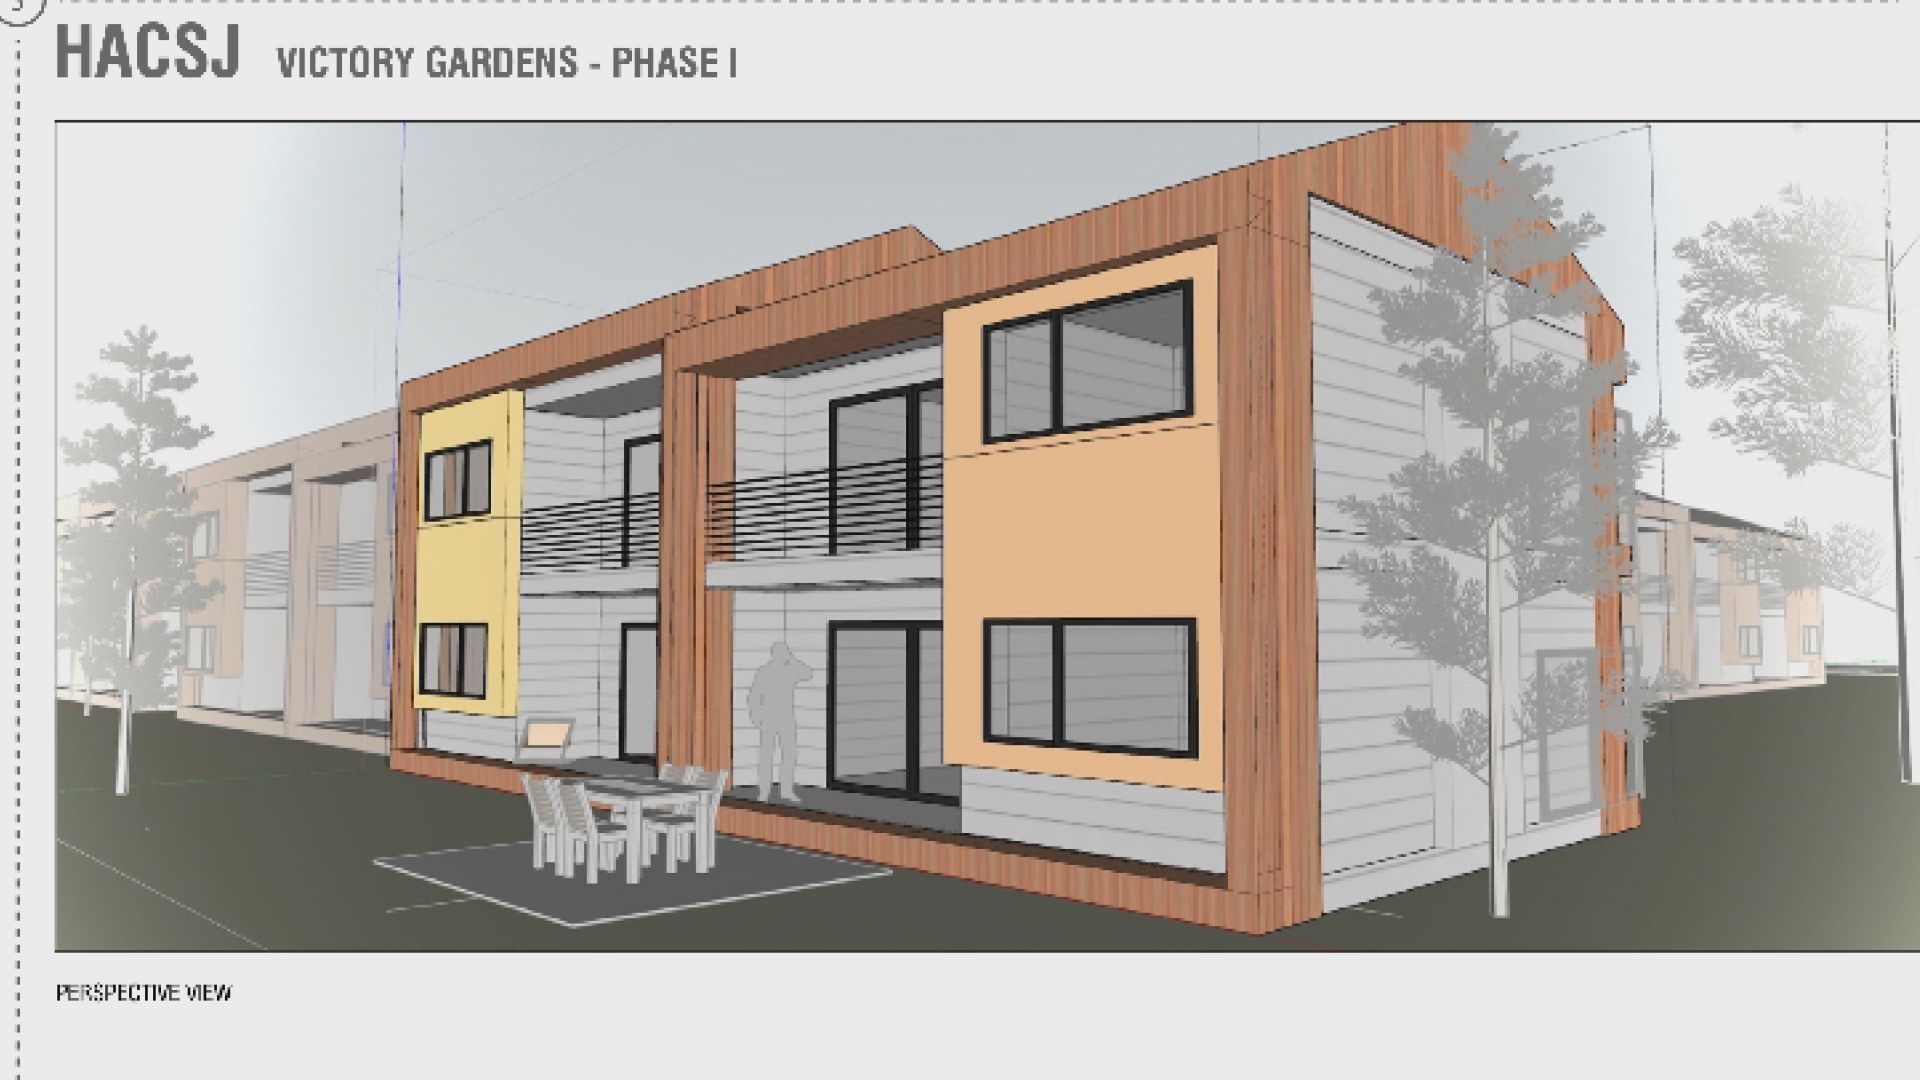 Victory Gardens will provide 49 affordable housing units along with a community garden, a common area for socializing, and a computer room.